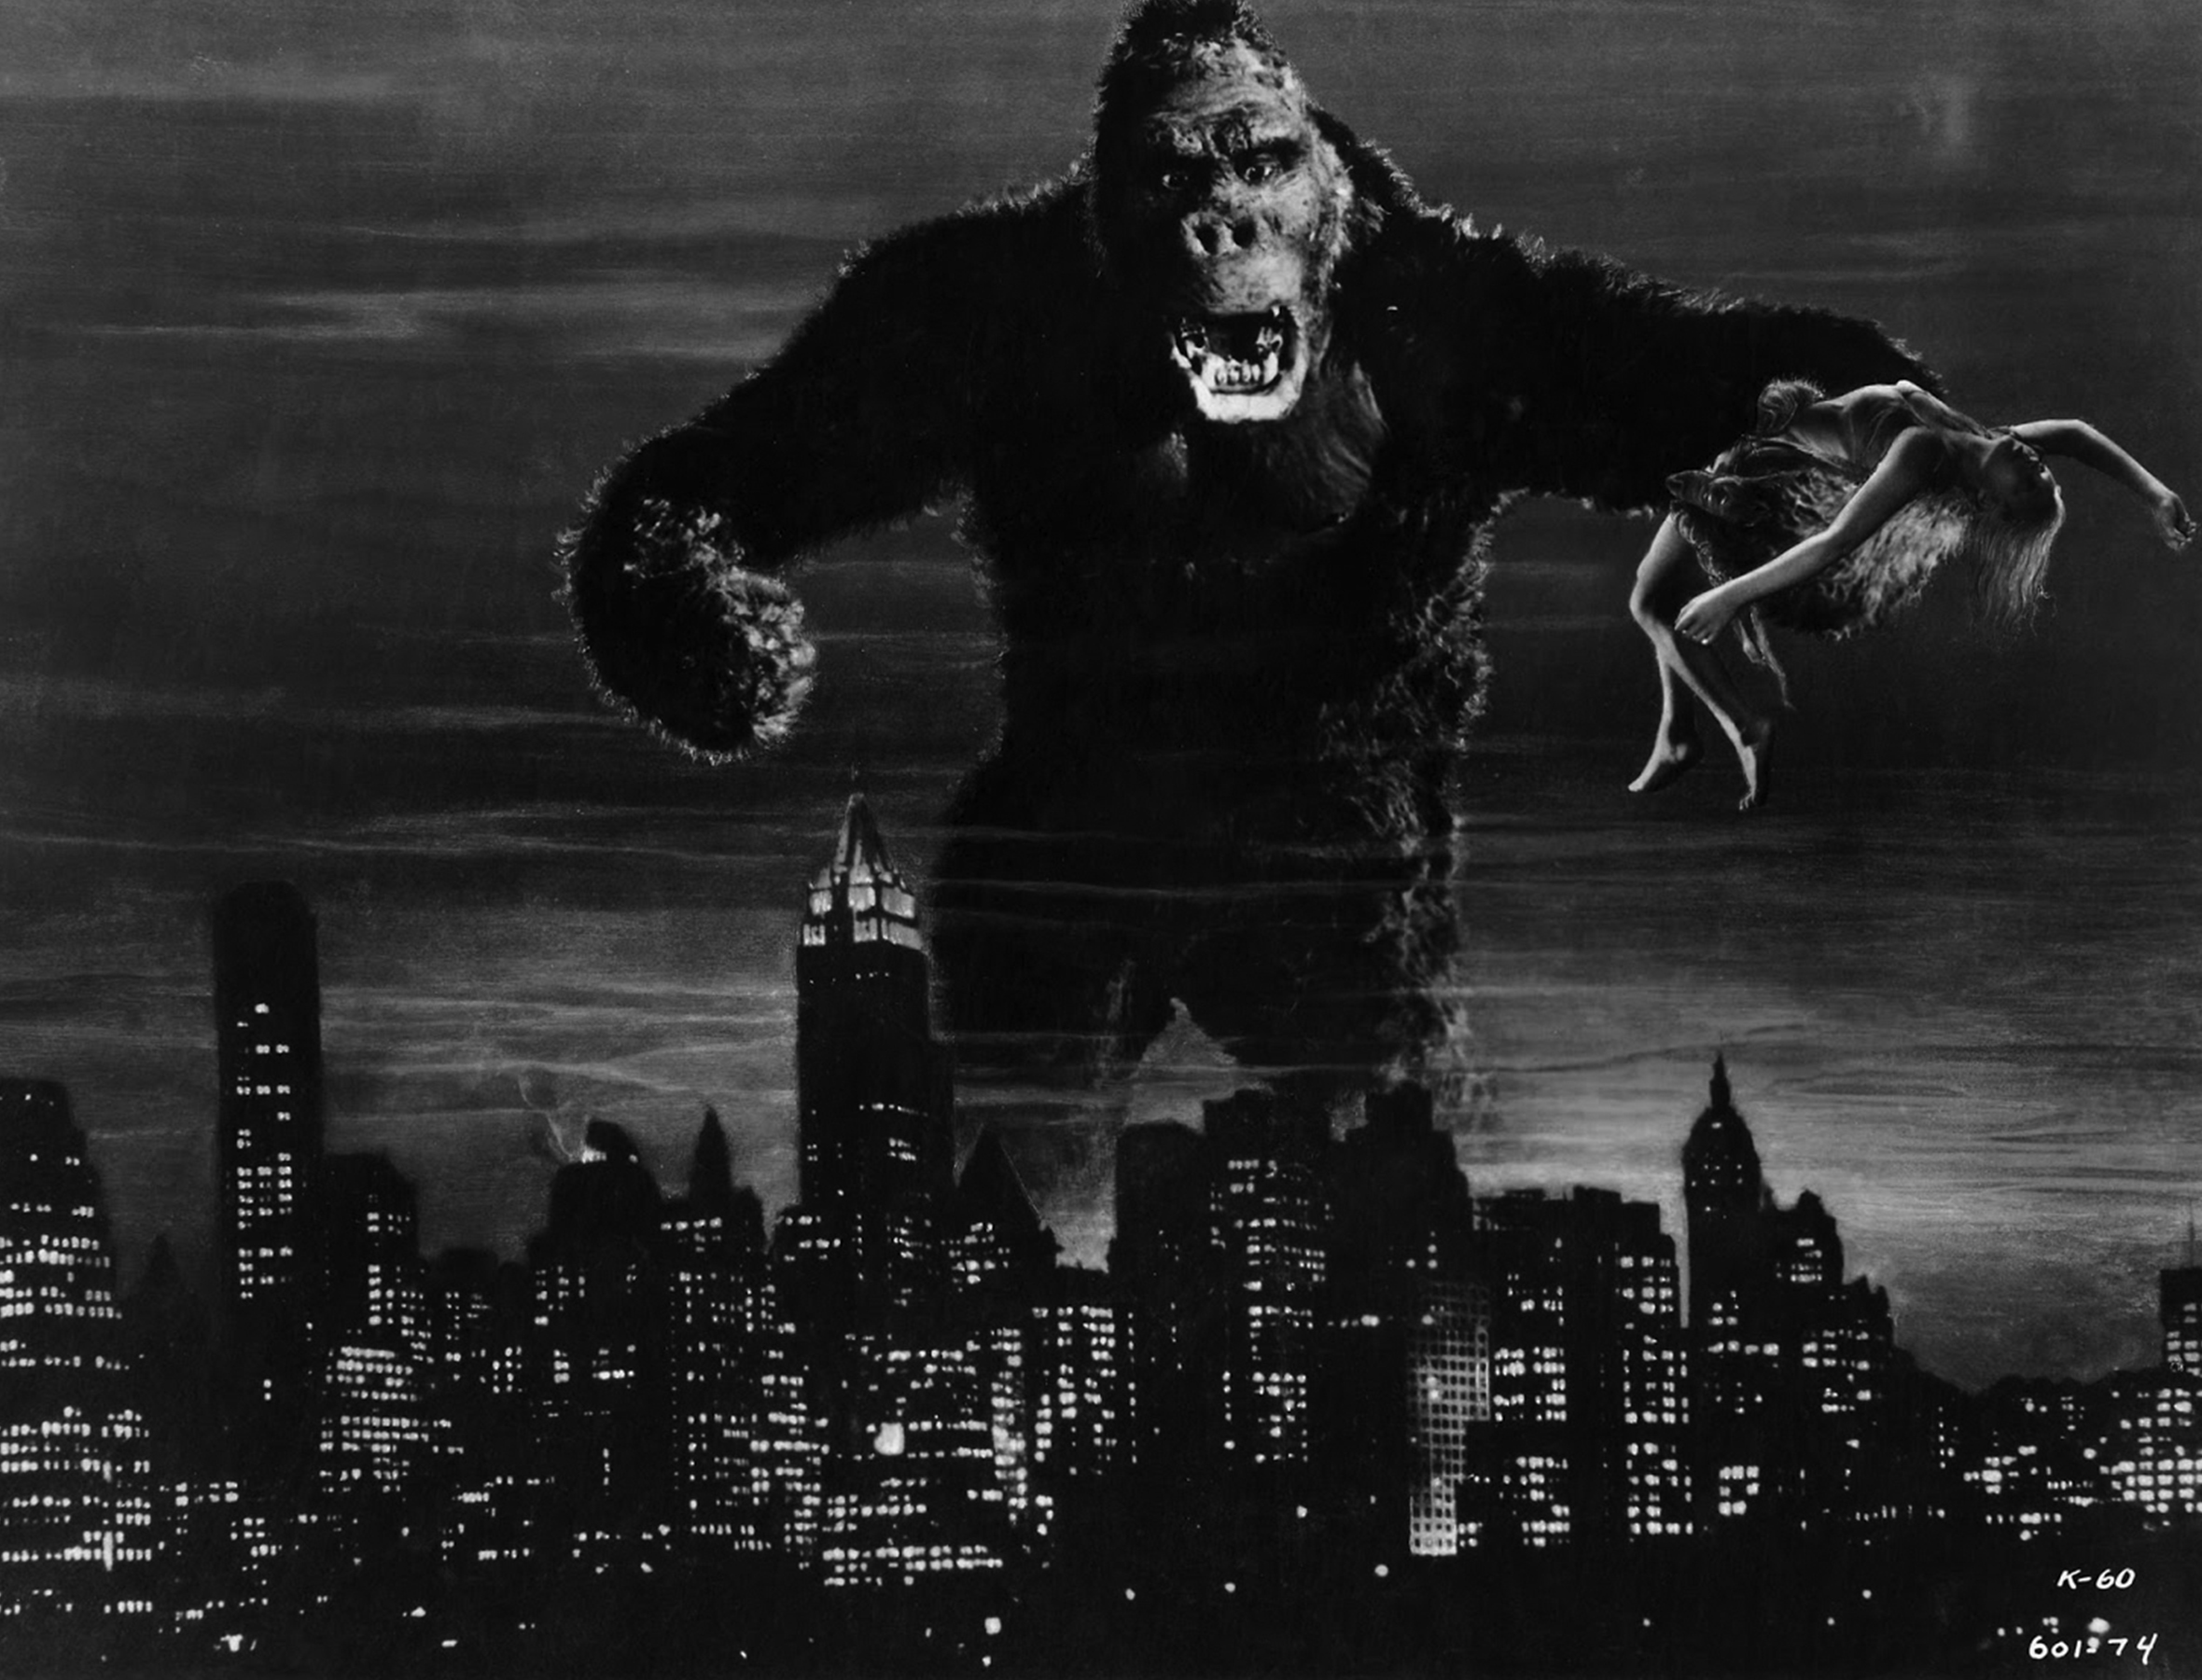 Publicity still from the 1933 RKO Radio Pictures film King Kong. King Kong is towering over the New York City skyline with Ann Darrow in his grasp.